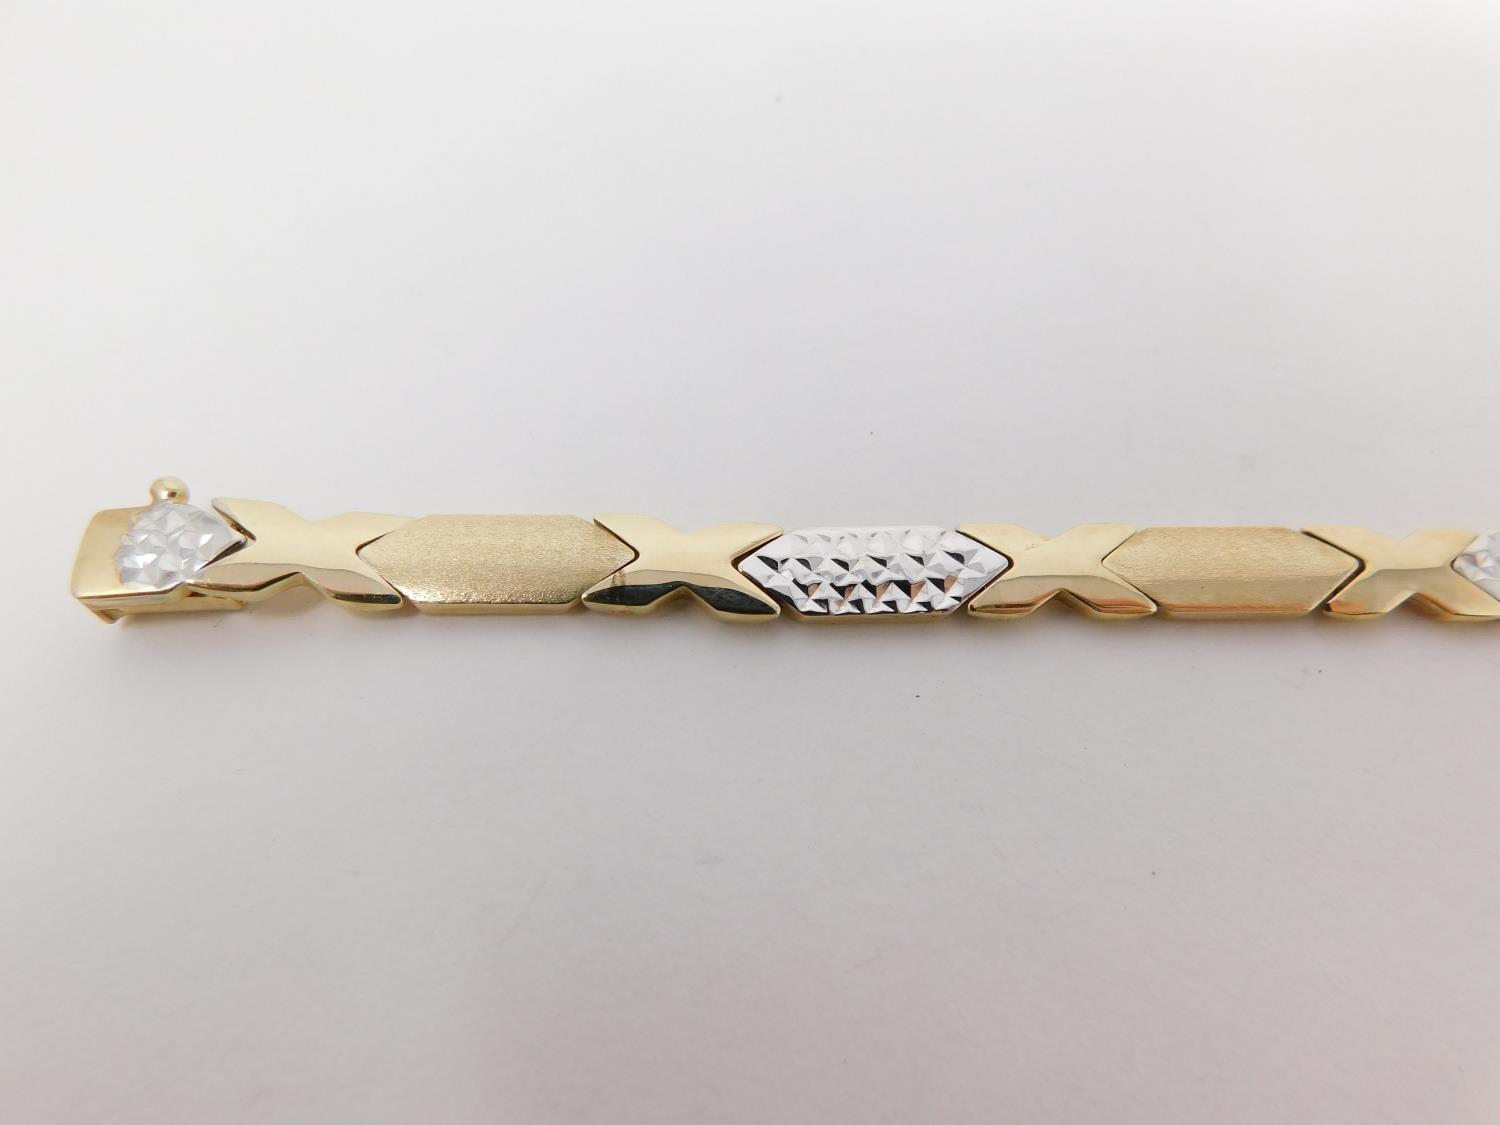 A 14 carat bi-colour gold articulated bracelet, with cross-hatched texture and X-shape design. - Image 2 of 10